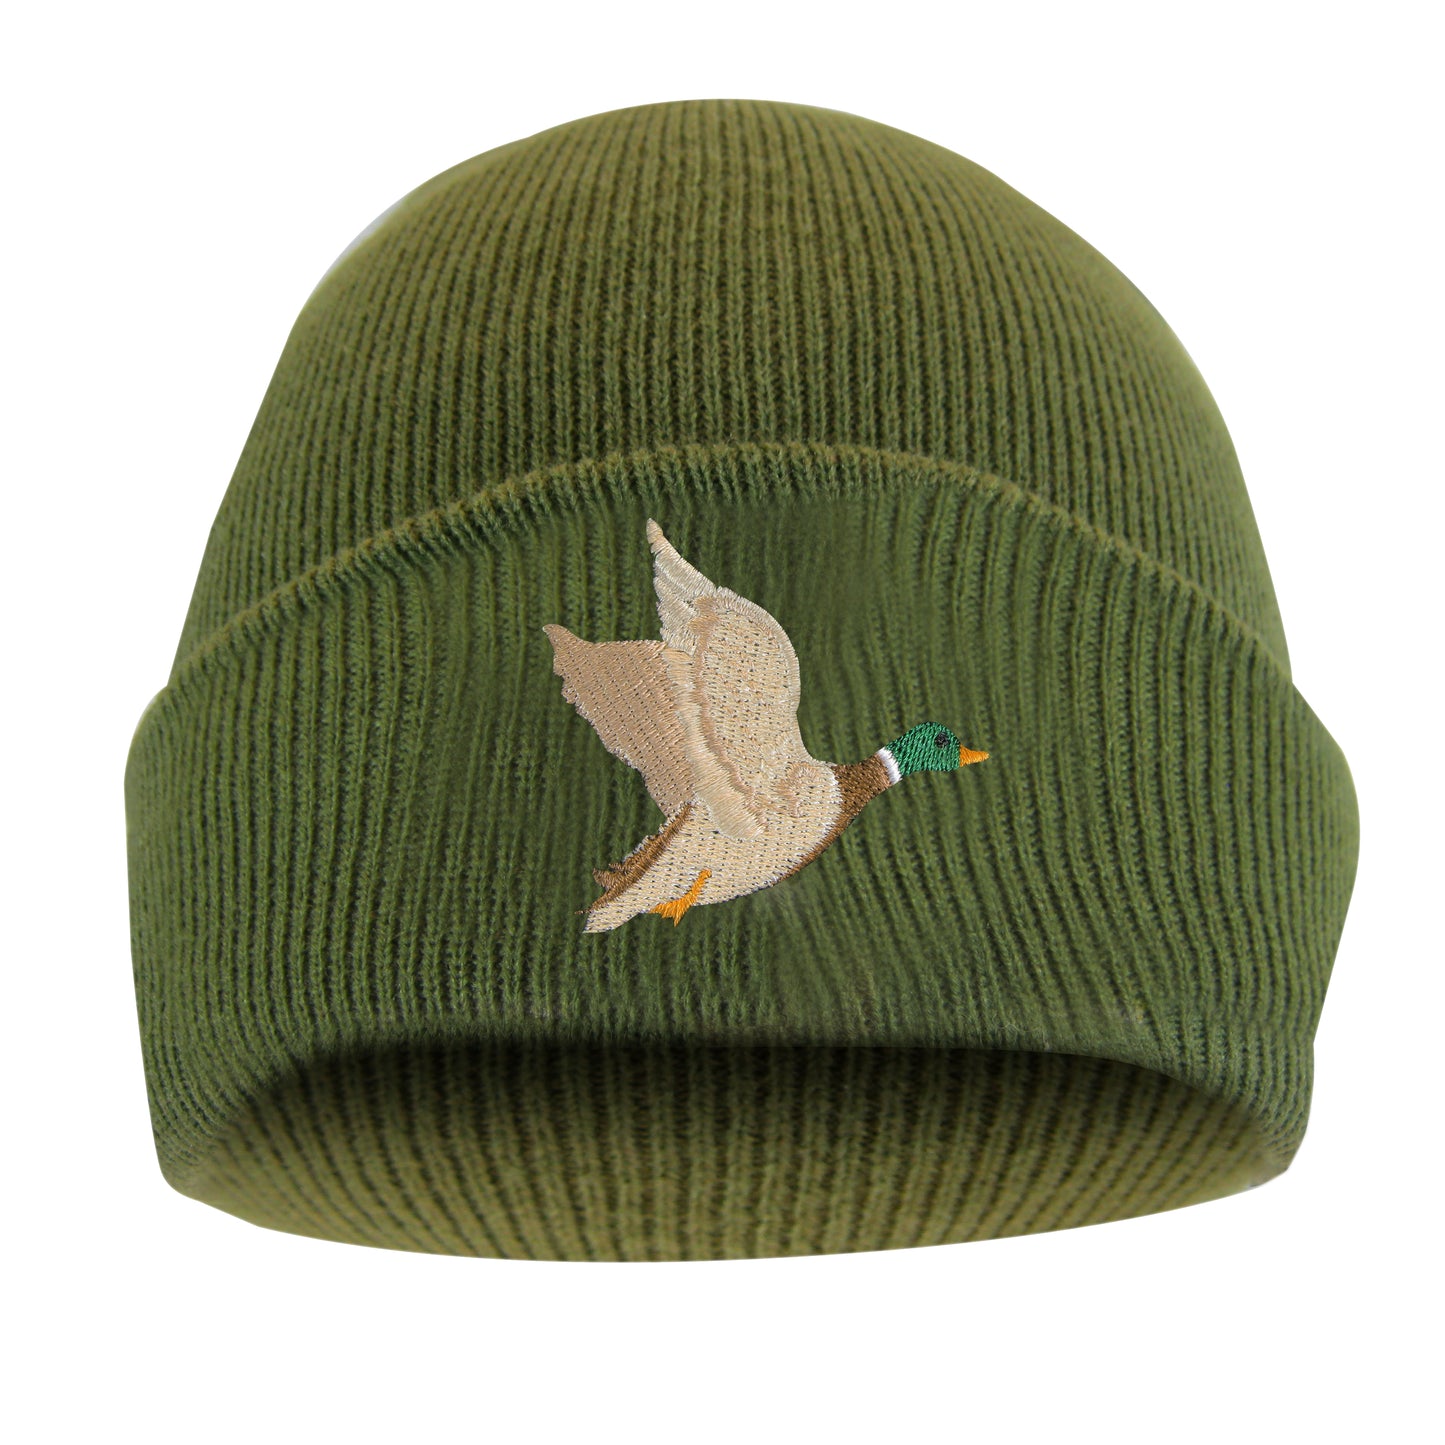 TUQUE DOUBLÉE THERMAKEEPER AVEC BRODERIE D’ANIMAL JACKFIELD